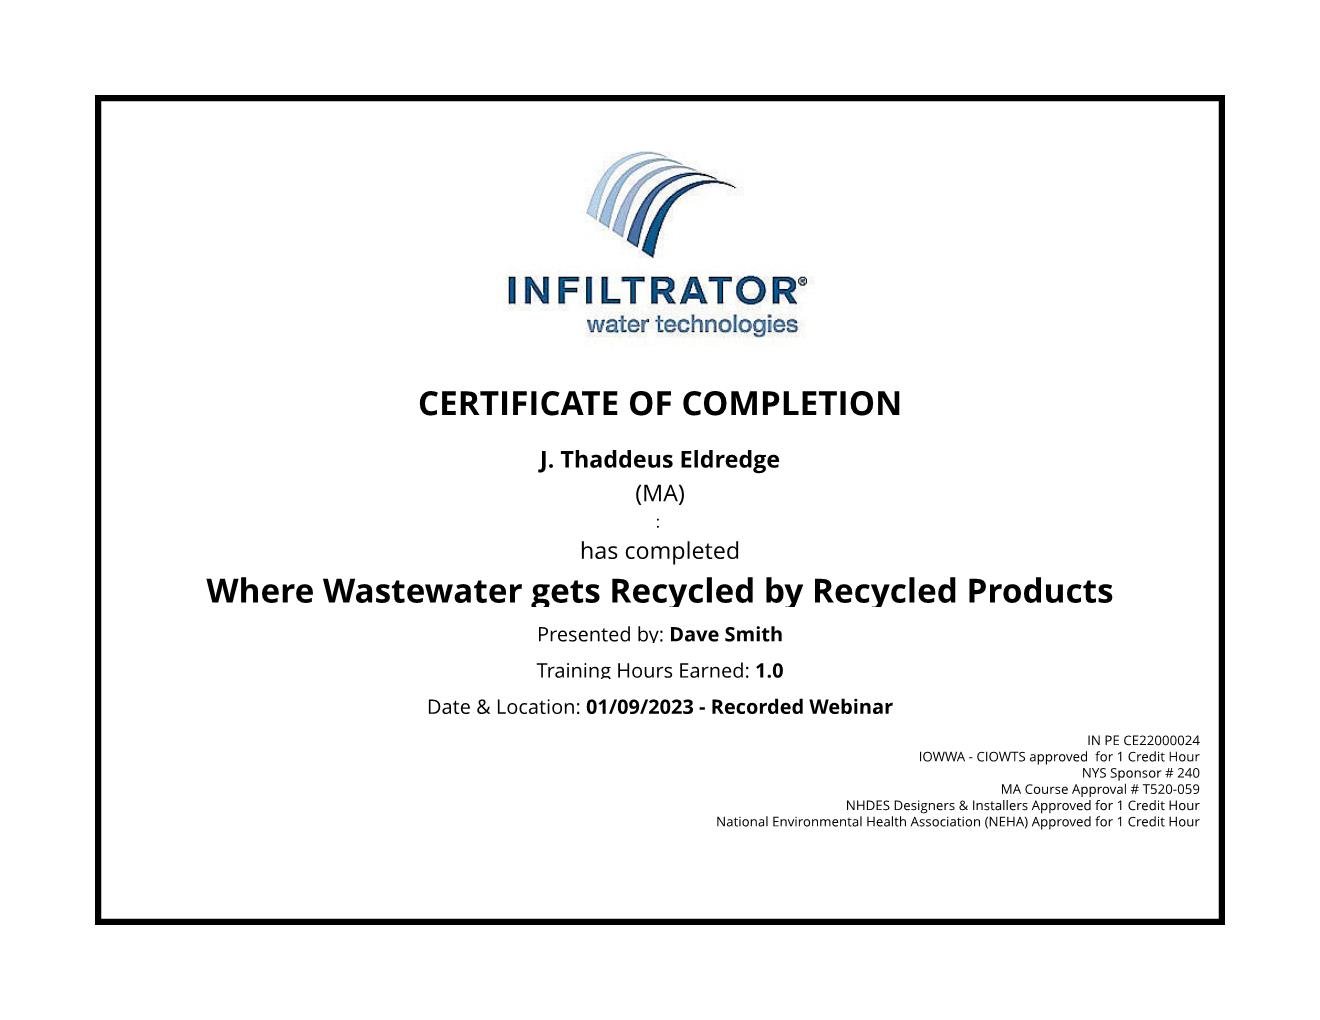 Webinar Certificate Recycled Products.jpg